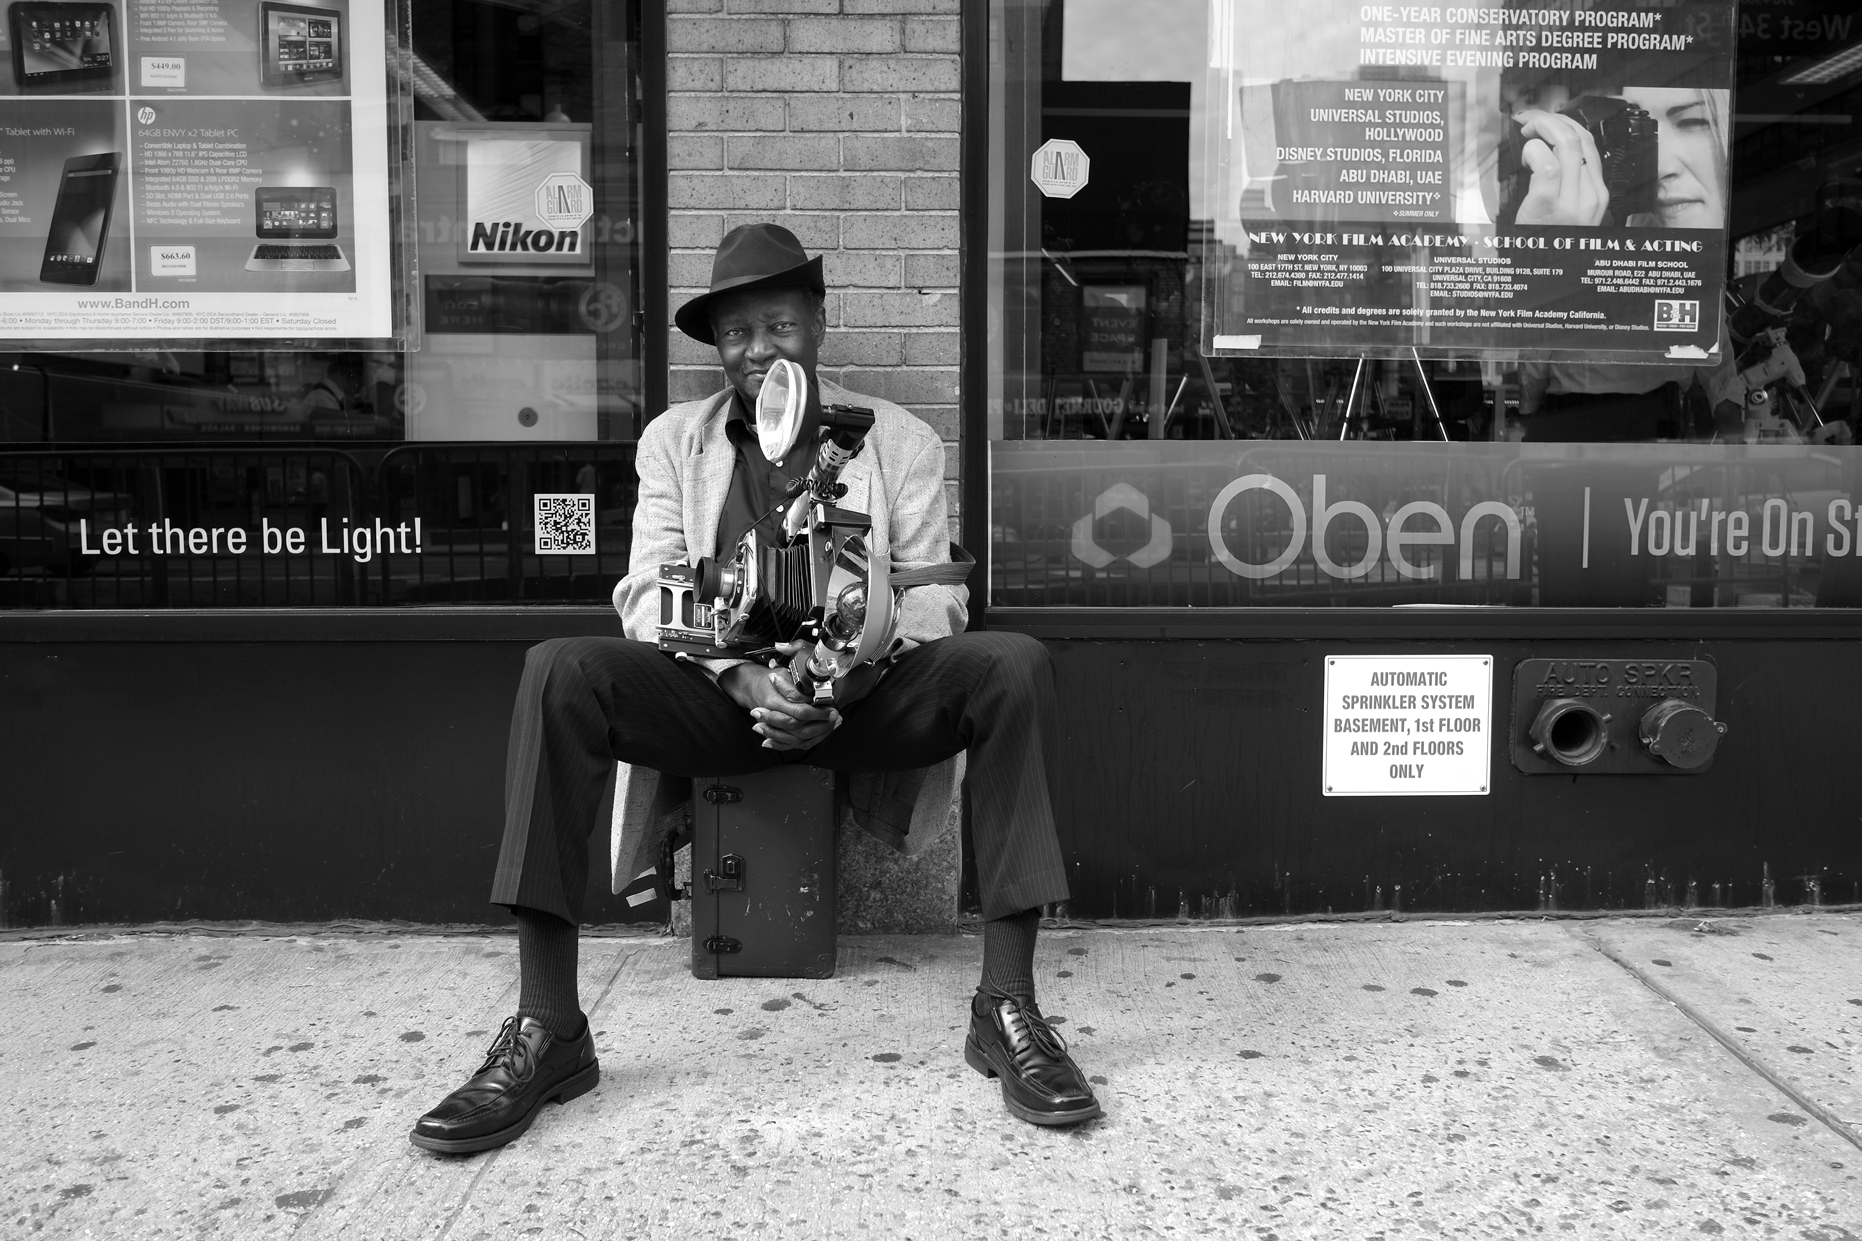 Louis Mendes: Renowned NYC Street Photographer - Behind the Scenes